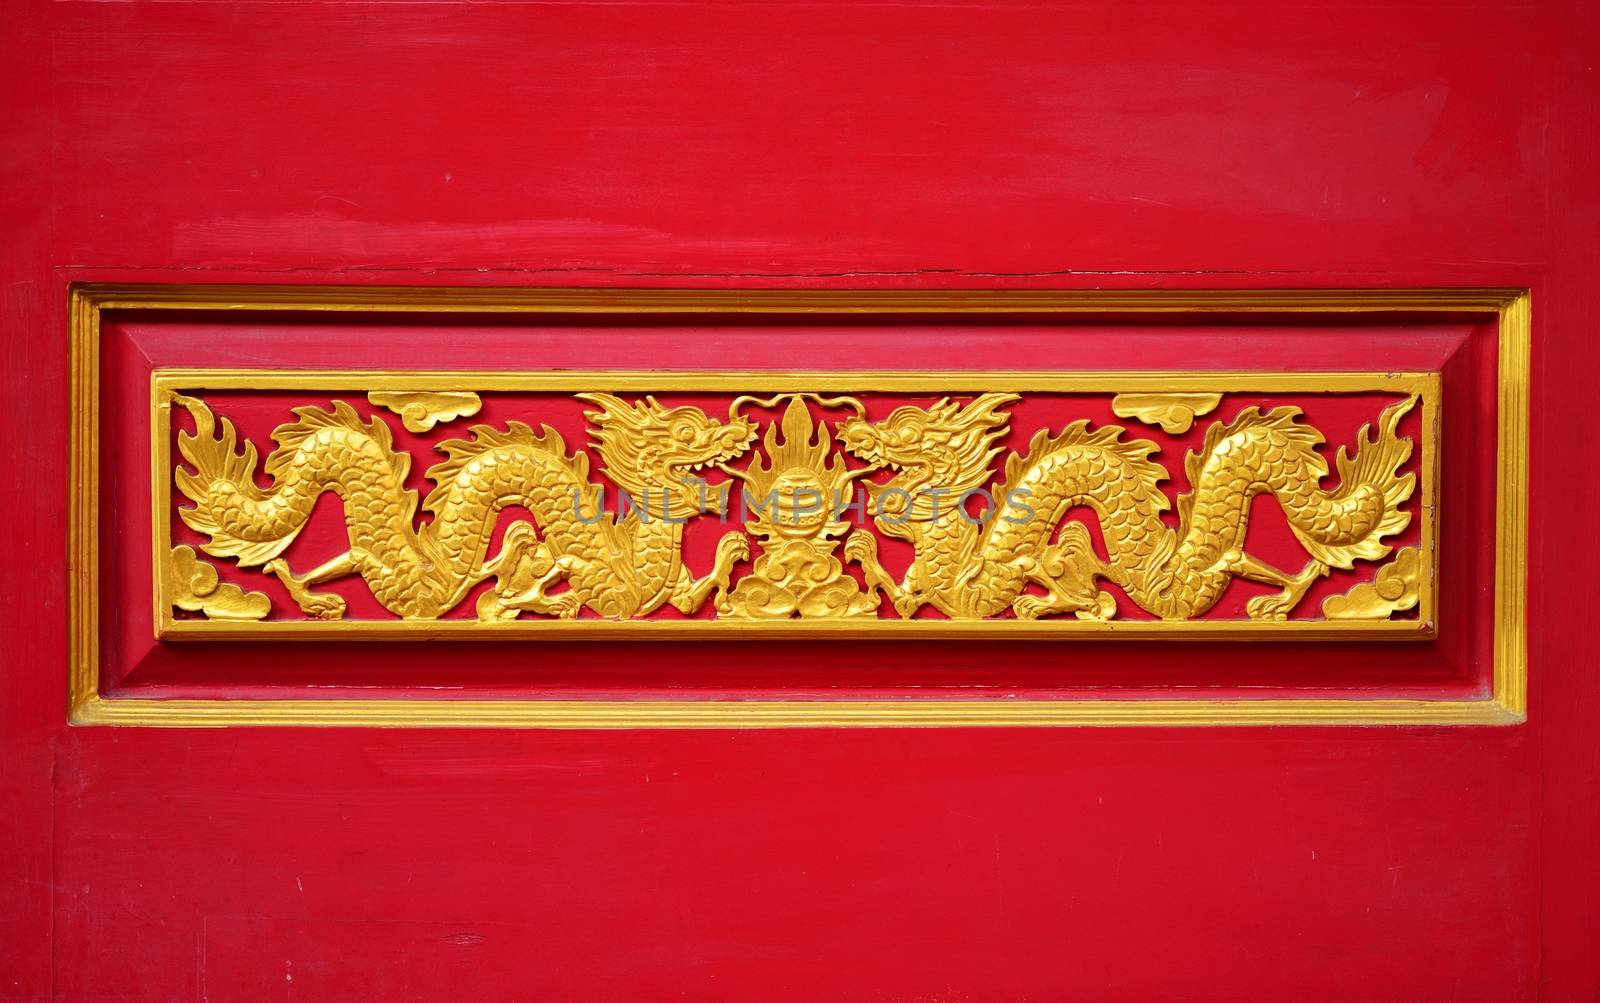 A coupple golden dragon on the red wall of Chinese temple in Thailand